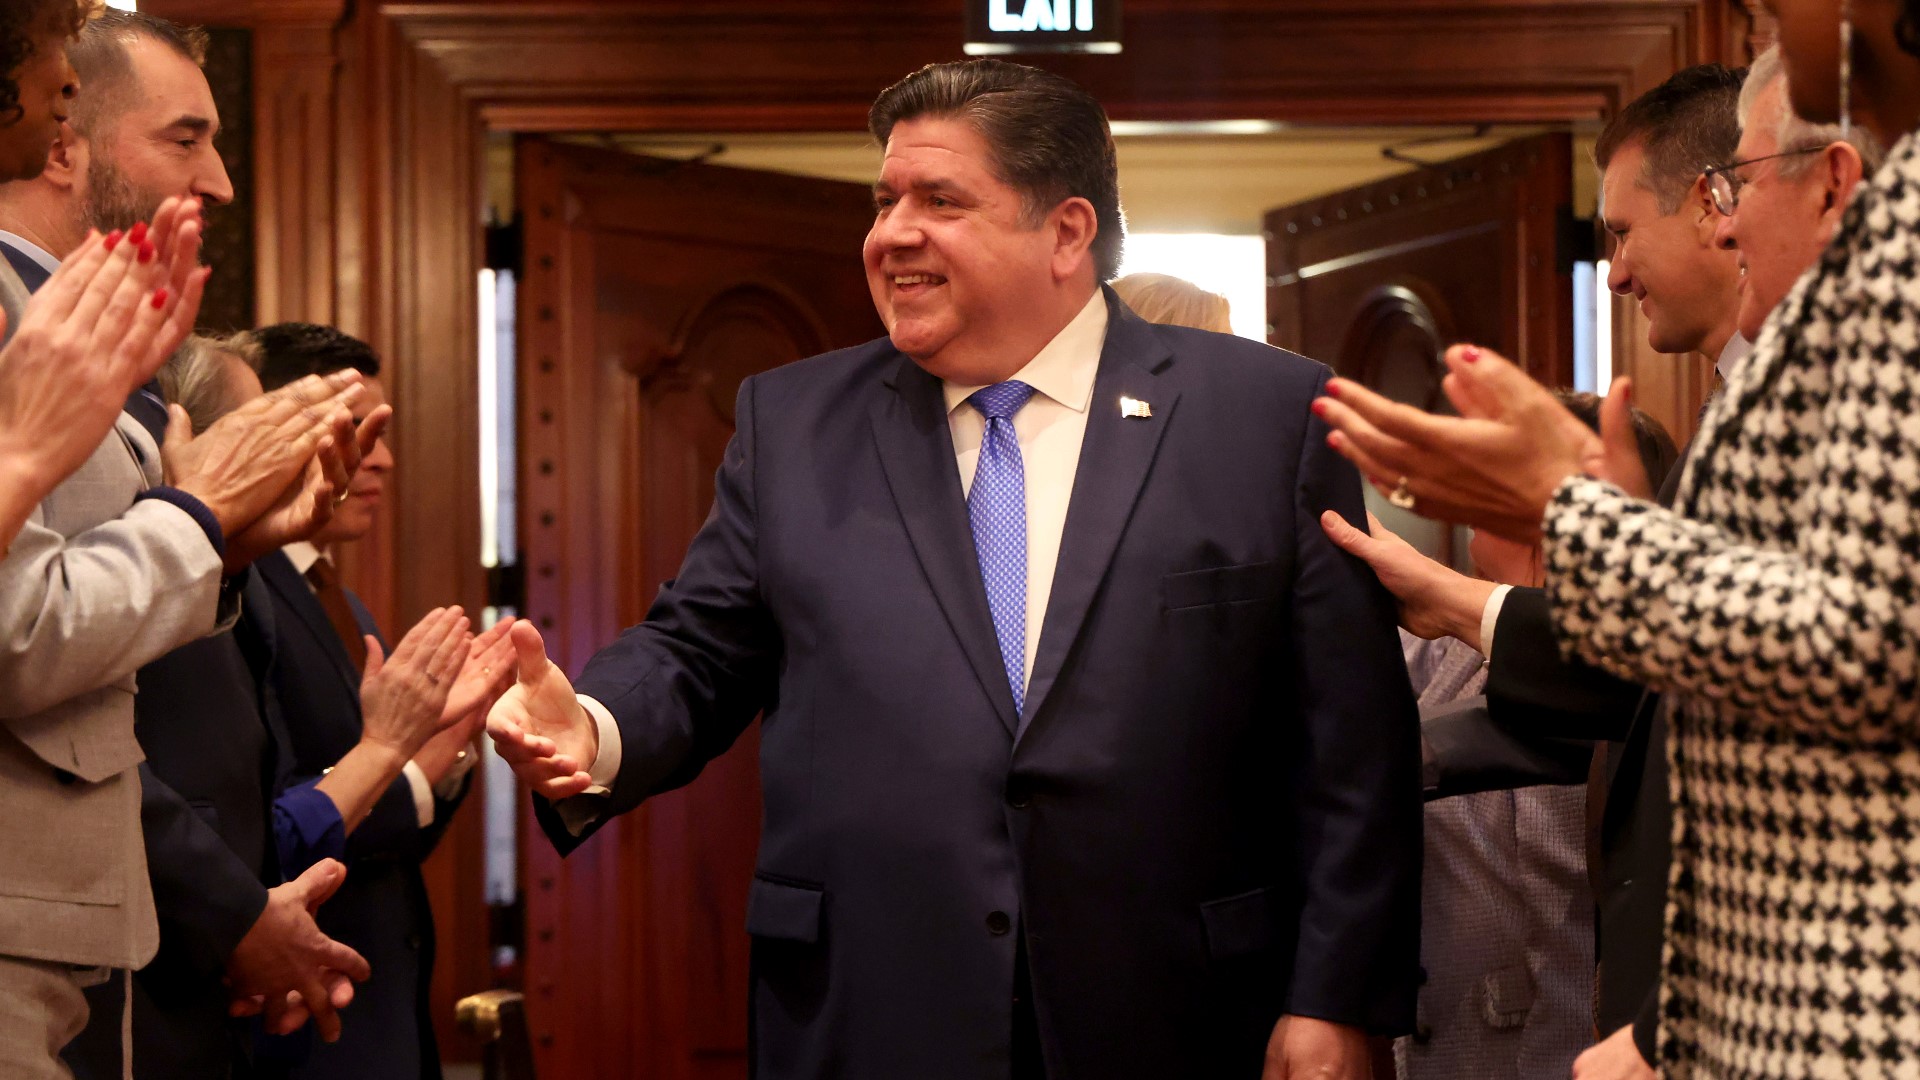 Pritzker characterized the proposed budget for the fiscal year starting July 1, and representing a roughly 2% increase in spending, as “focused and disciplined."